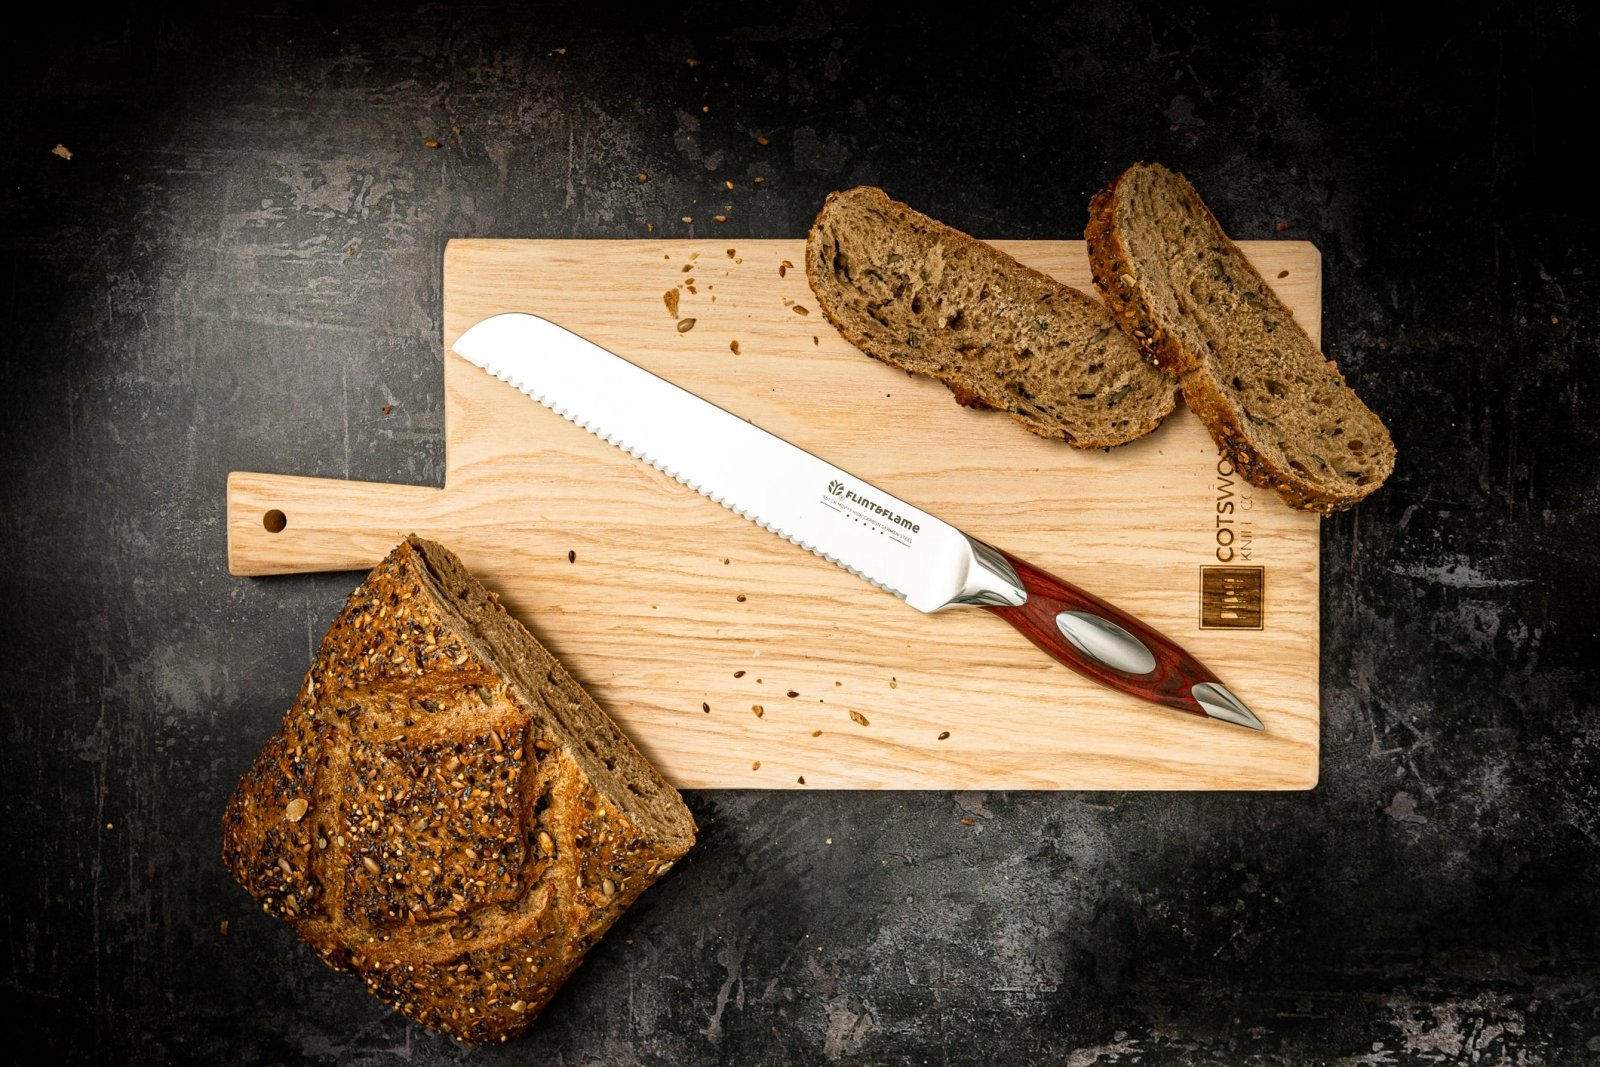 Flint and Flame 8 inch Bread Knife - FF-8BREAD-BC - The Cotswold Knife Company